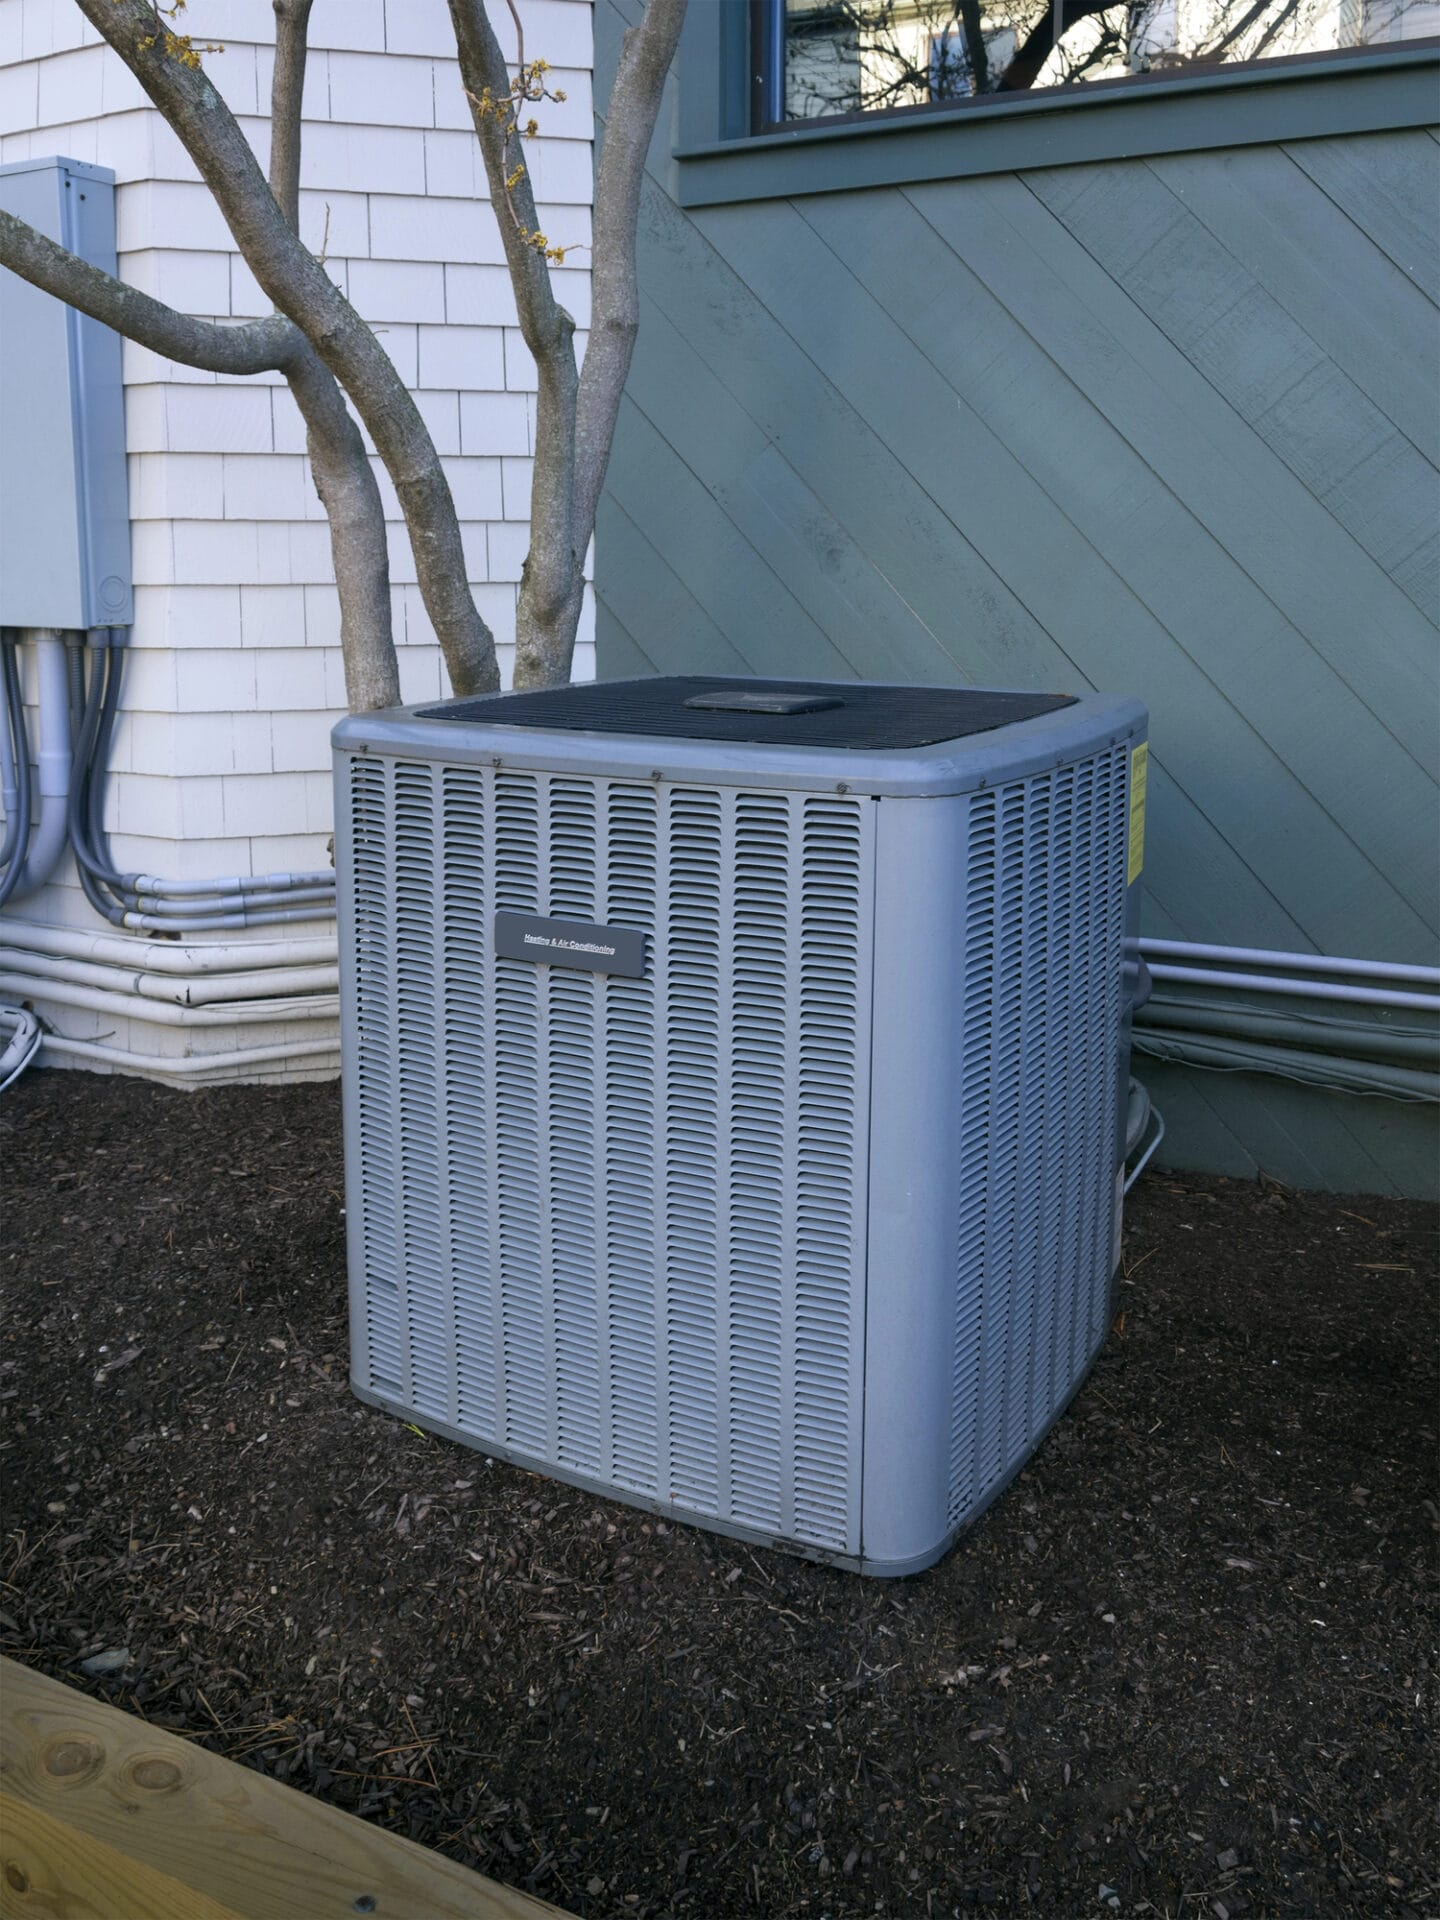 Outdoor central air conditioning unit beside a house.